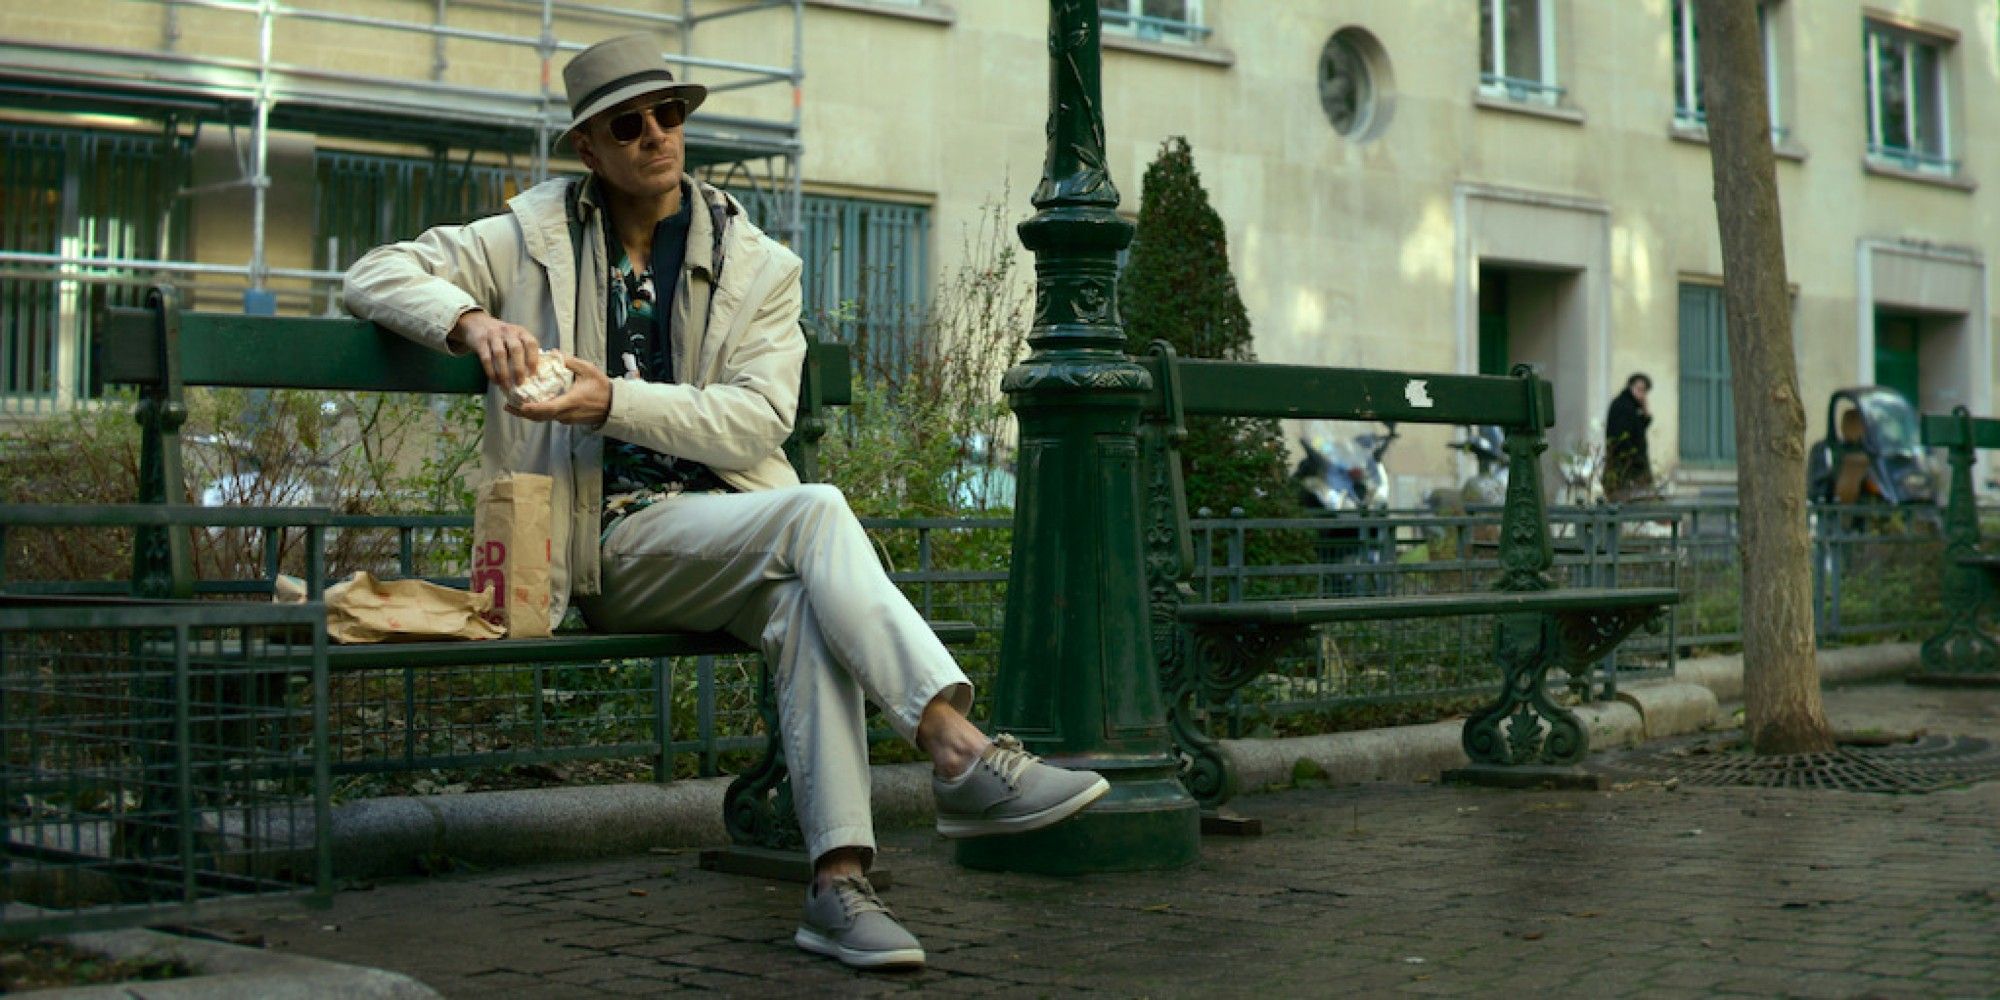 Michael Fassbender in The Killer eating McDonald's on a park bench in Paris